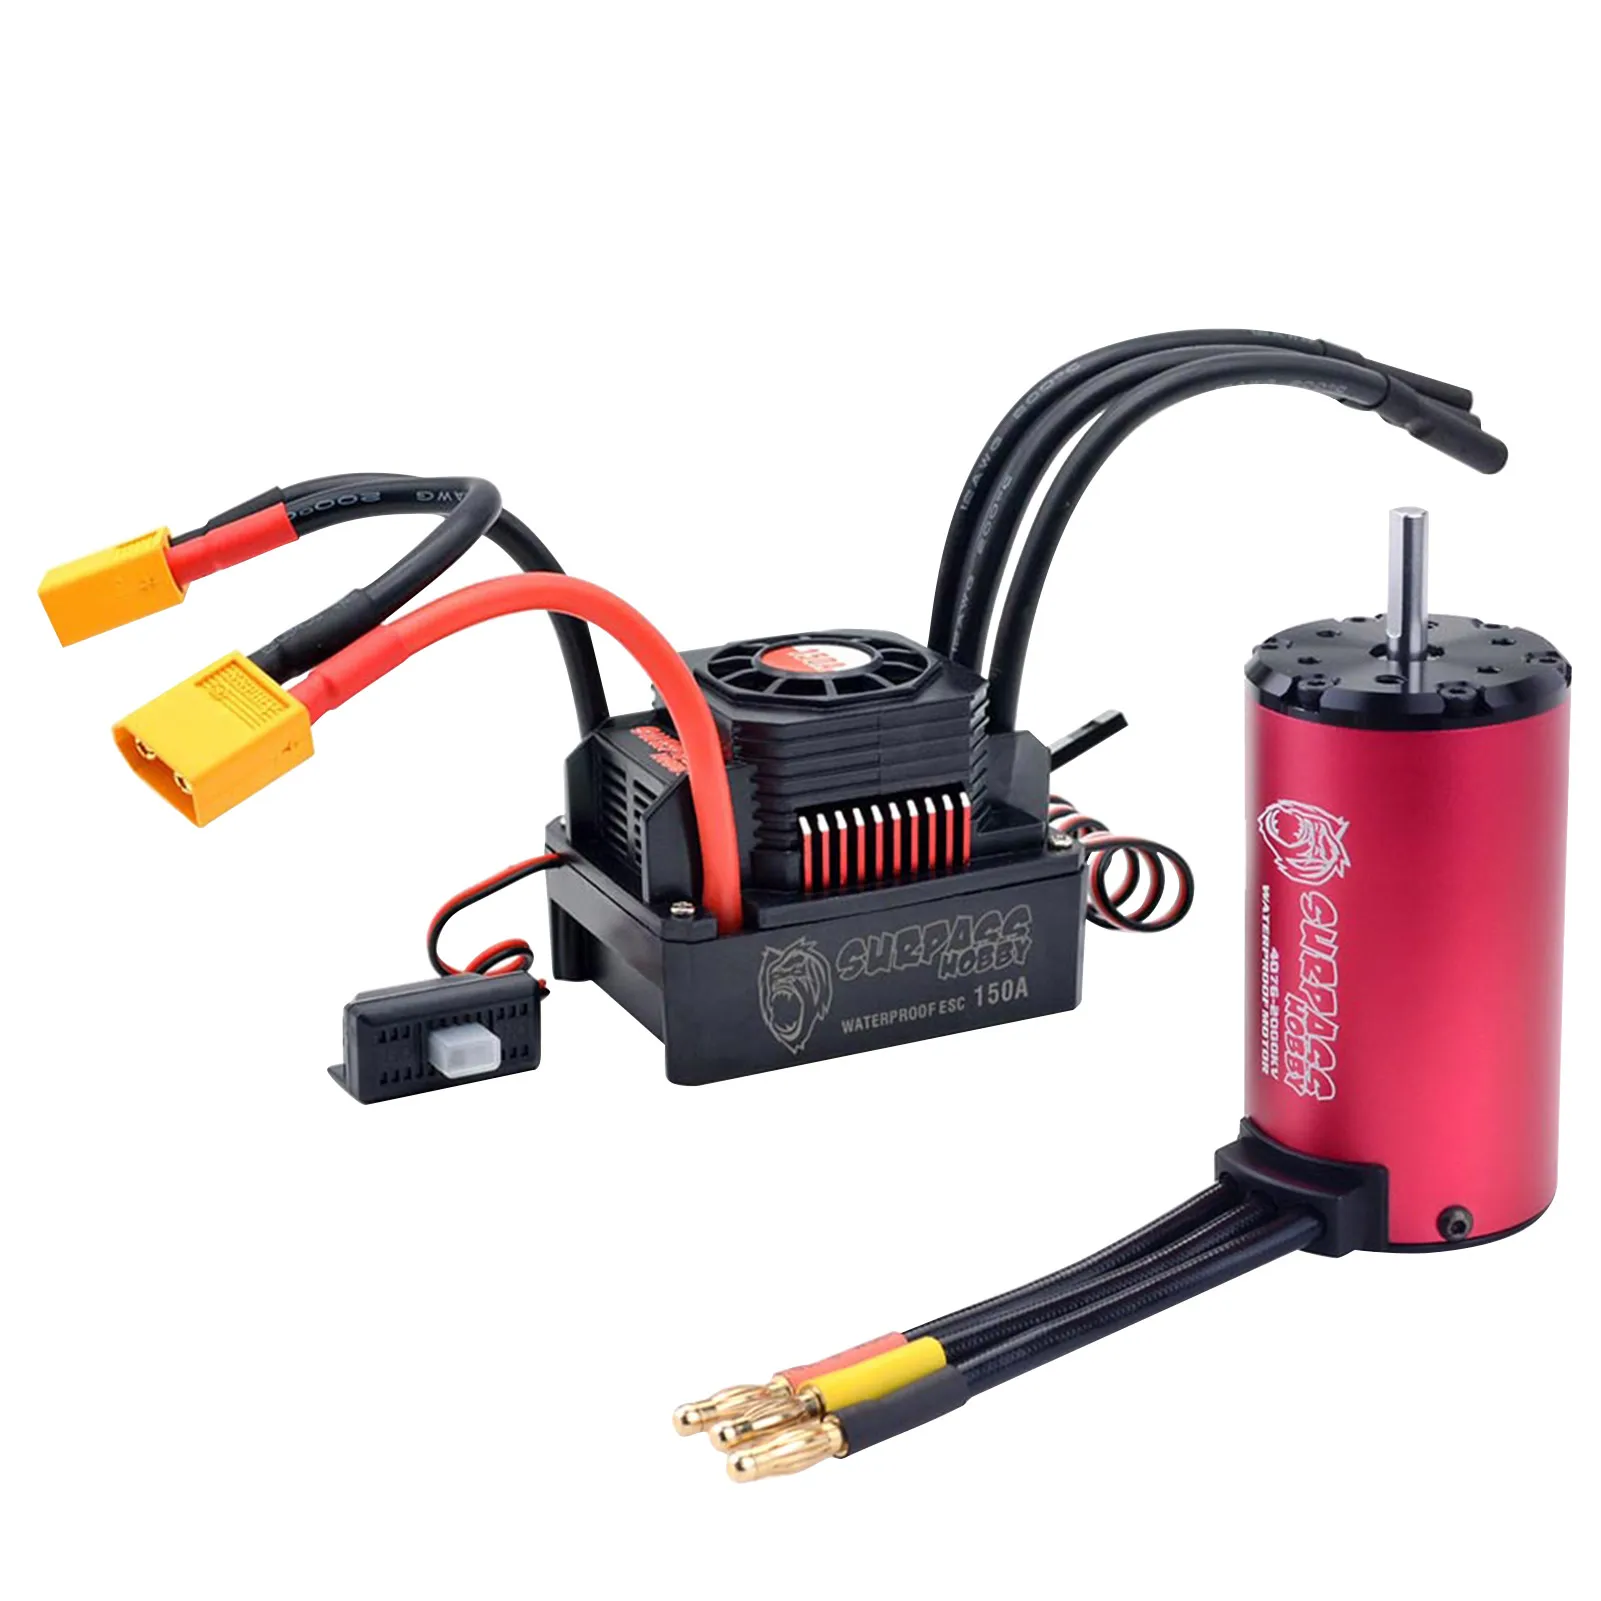 

2000 KV 4076/ 3100 KV 3650 Brushless Motor Waterproof 150A Brushless ESC with BEC XT60 Plug for 1/8 RC Car Accessories